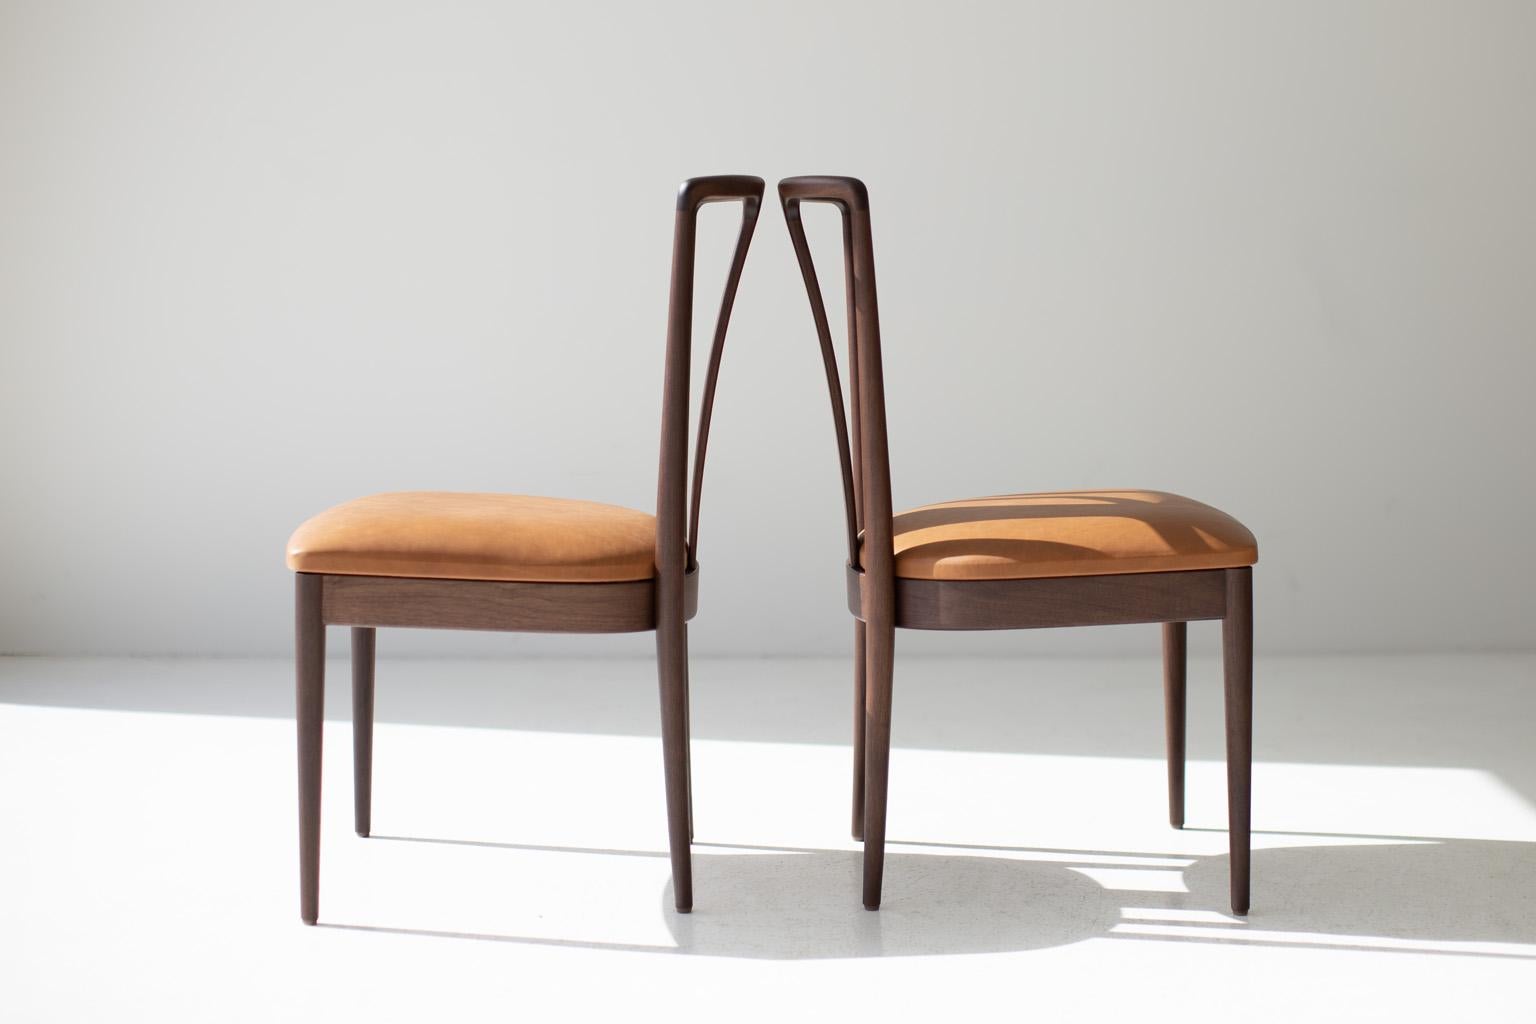 Derby Dining Chairs, Modern Wood Dining Chairs, Walnut, Leather, Peabody, Craft 

These Modern Wood Dining Chair by Lawrence Peabody : The Derby Chair for Craft Associates Furniture are expertly hand crafted and upholstered. These Peabody chairs